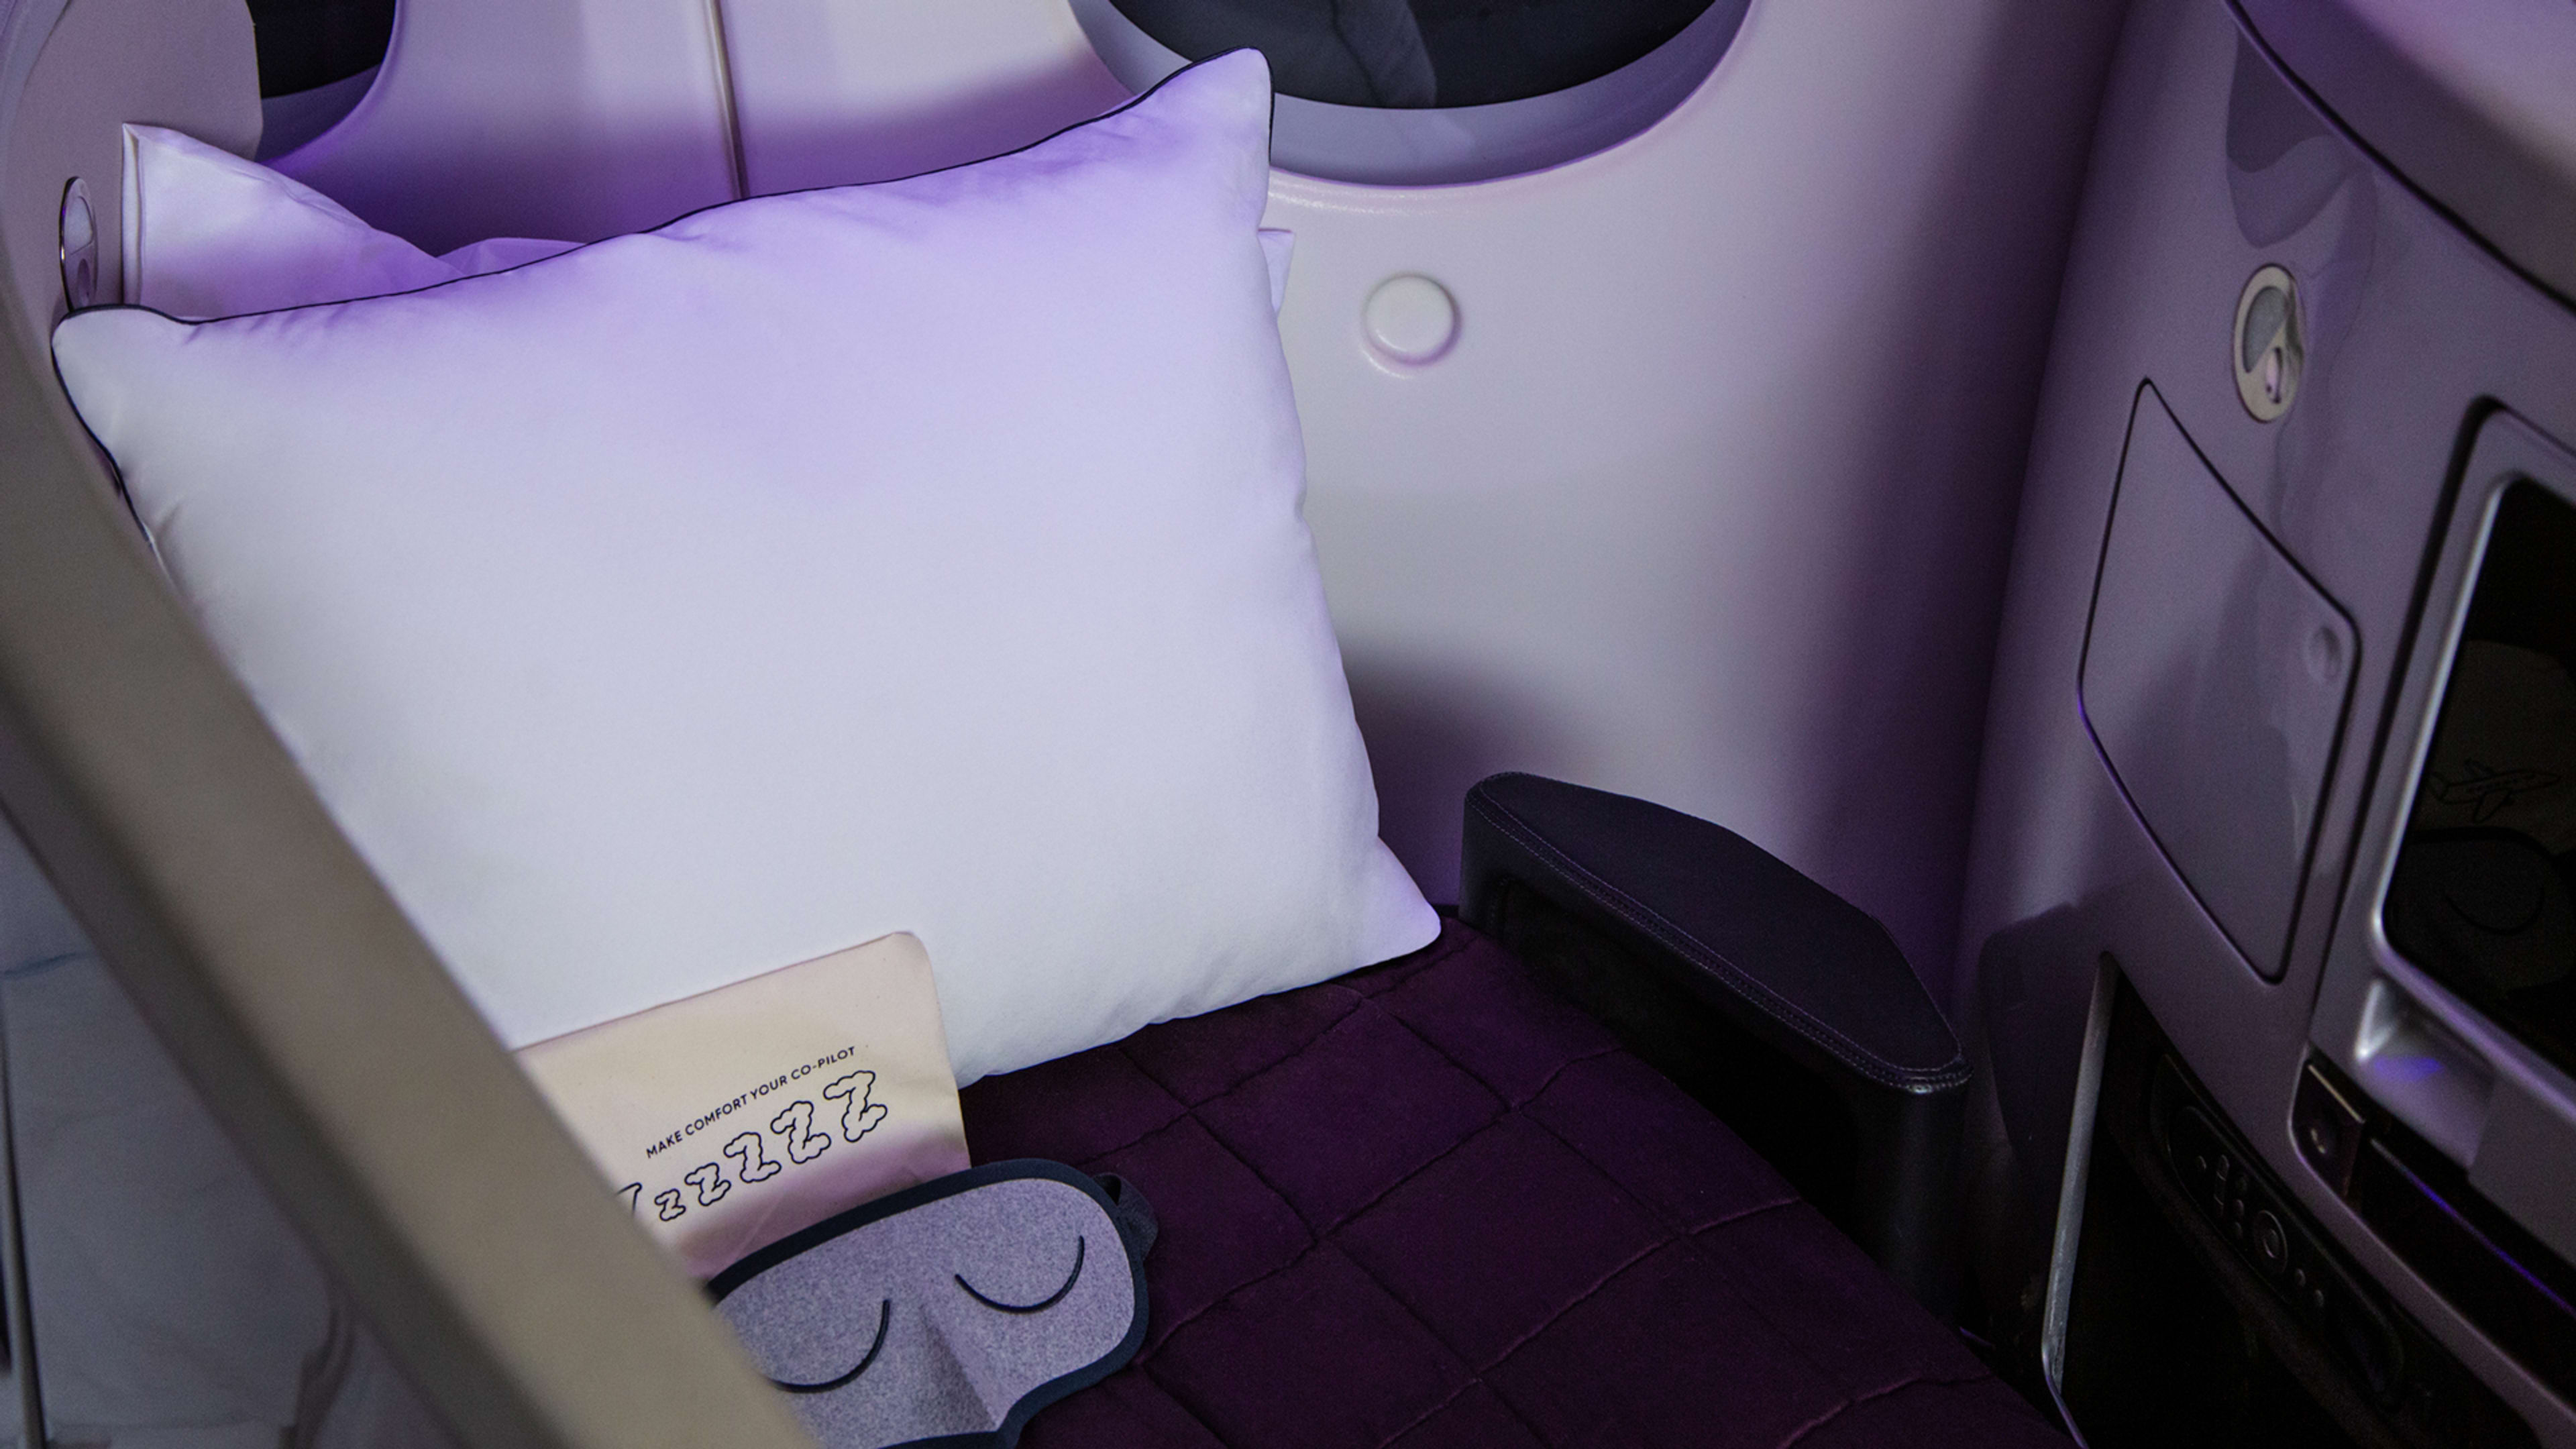 This airline just built a better airplane pillow with help from NASA